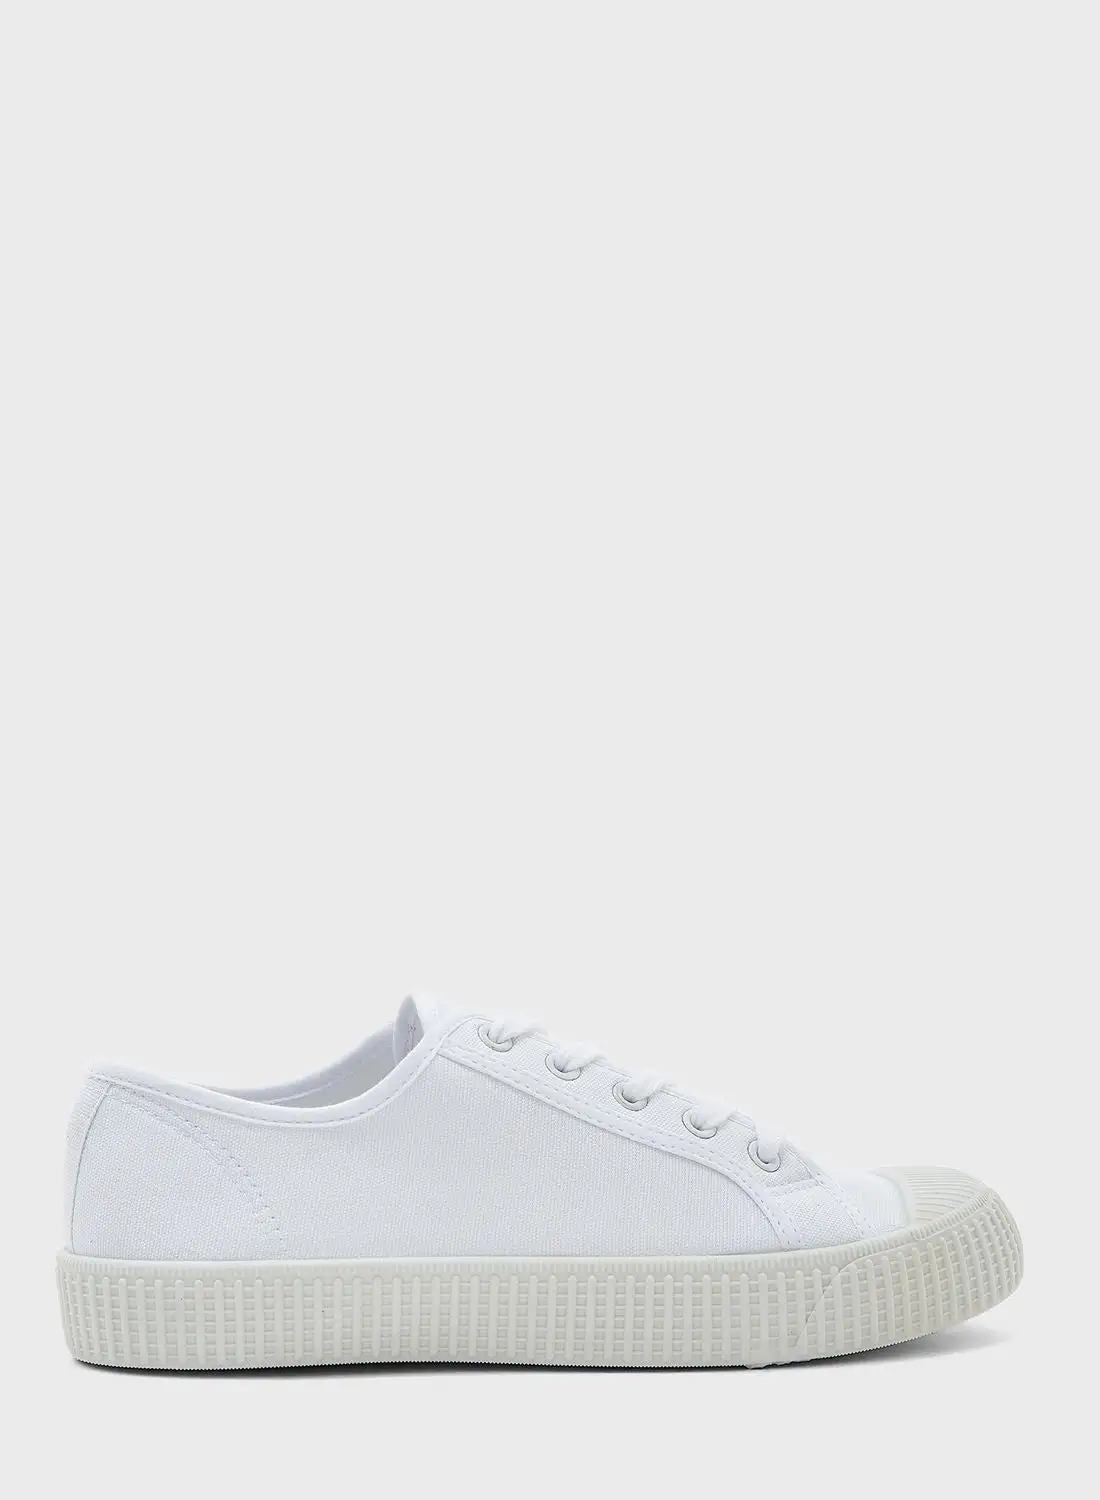 NEW LOOK Morello Wide Fit Canvas Low Top Sneakers